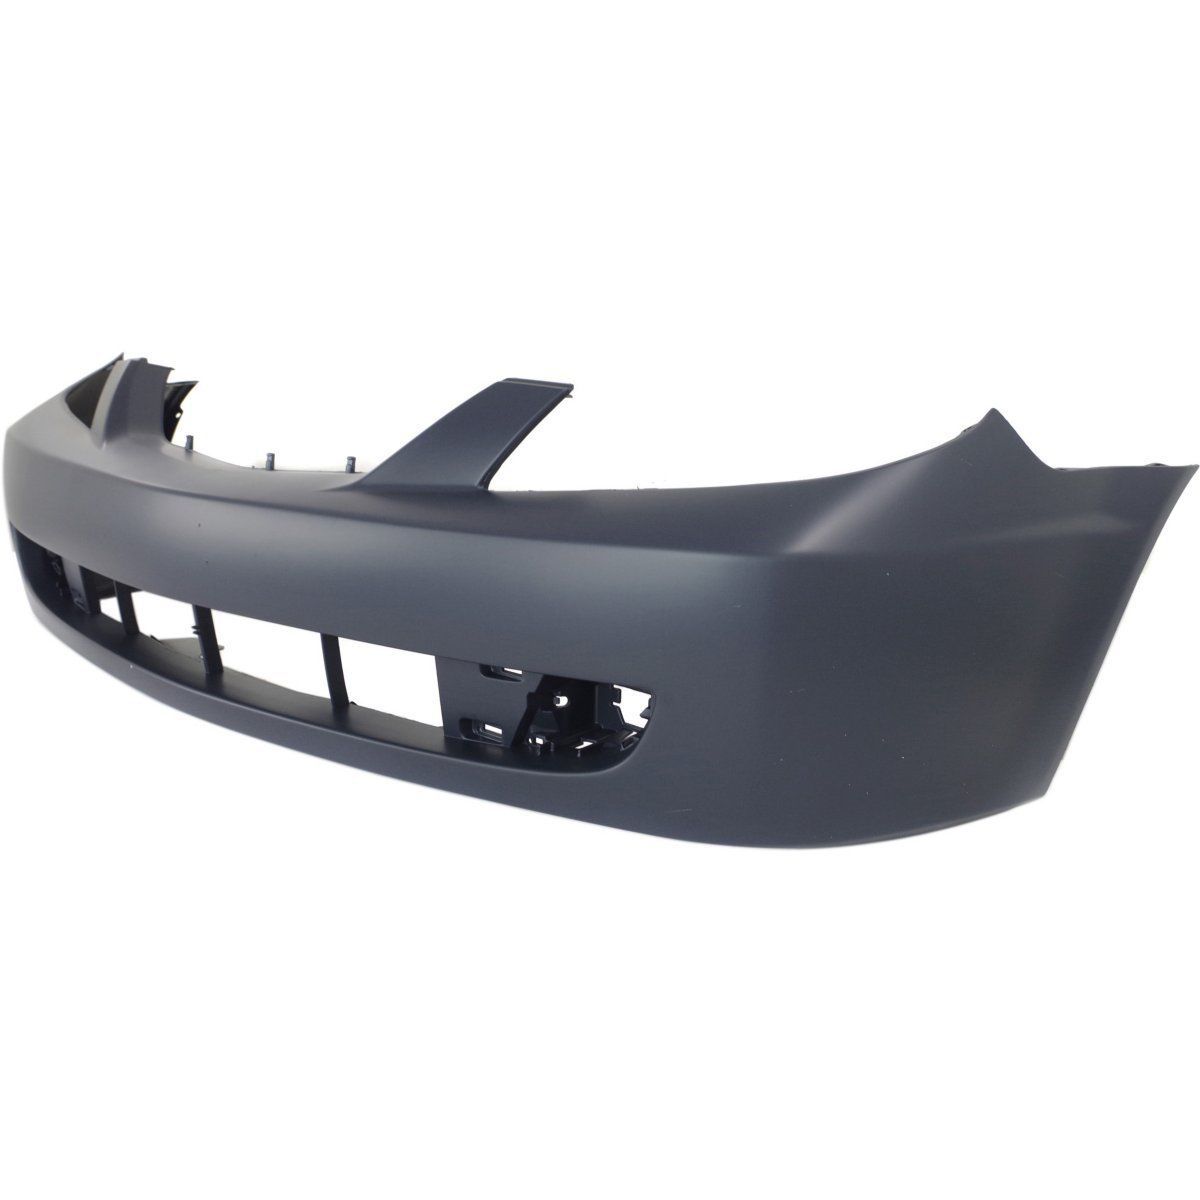 2001-2003 MAZDA 323/PROTEGE Front Bumper Cover 4dr sedan  w/o MP3 package Painted to Match